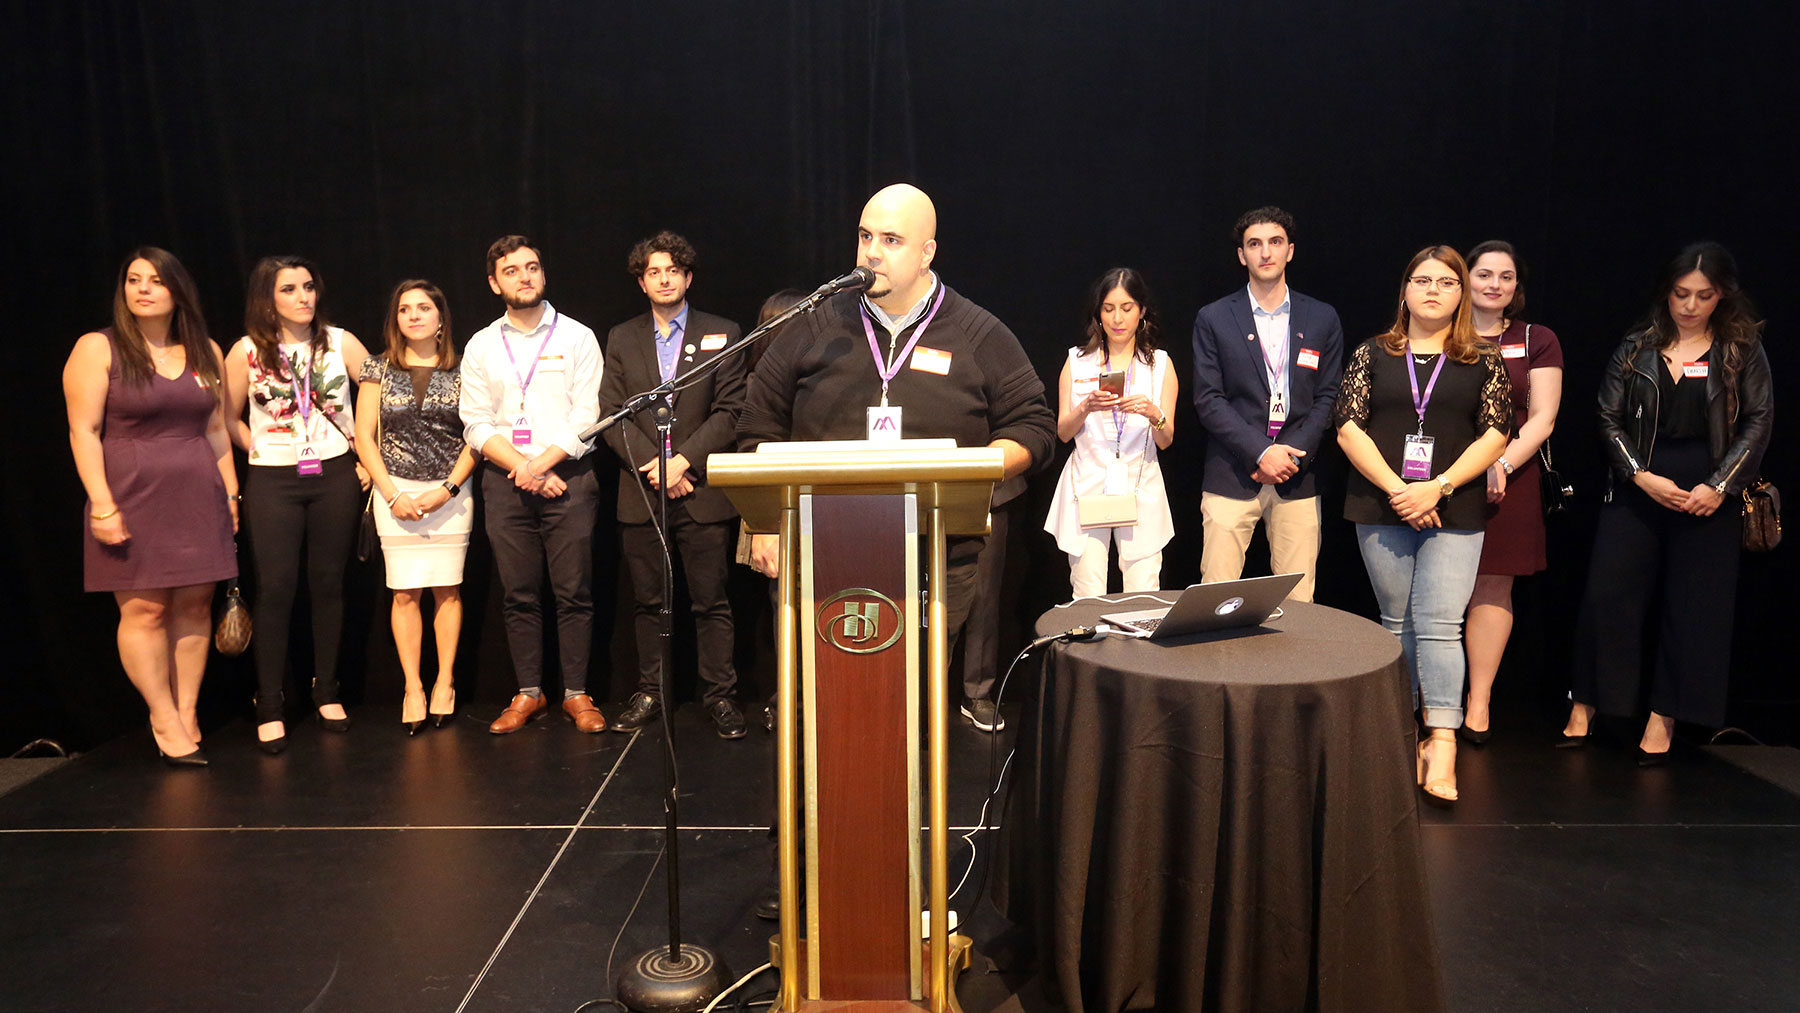 Philip Hovanessian of the Armenian Professional Network Los Angeles Chapter Welcoming Capacity Crowd at AYP Summer Mixer